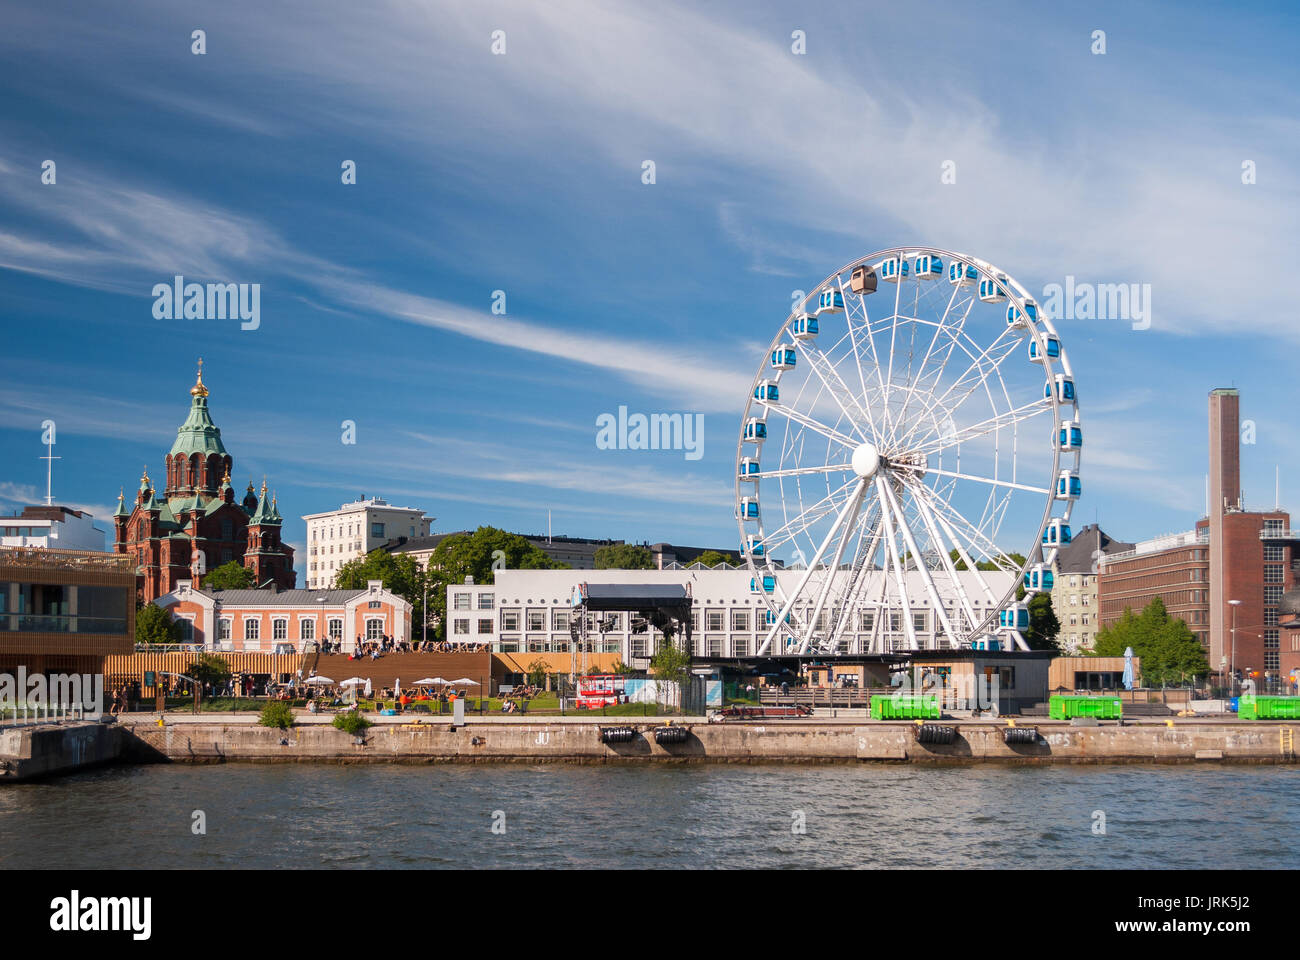 View of Helsinki harbor with Uspensky orthodox cathedral and a skywheel during a summer afternoon Stock Photo